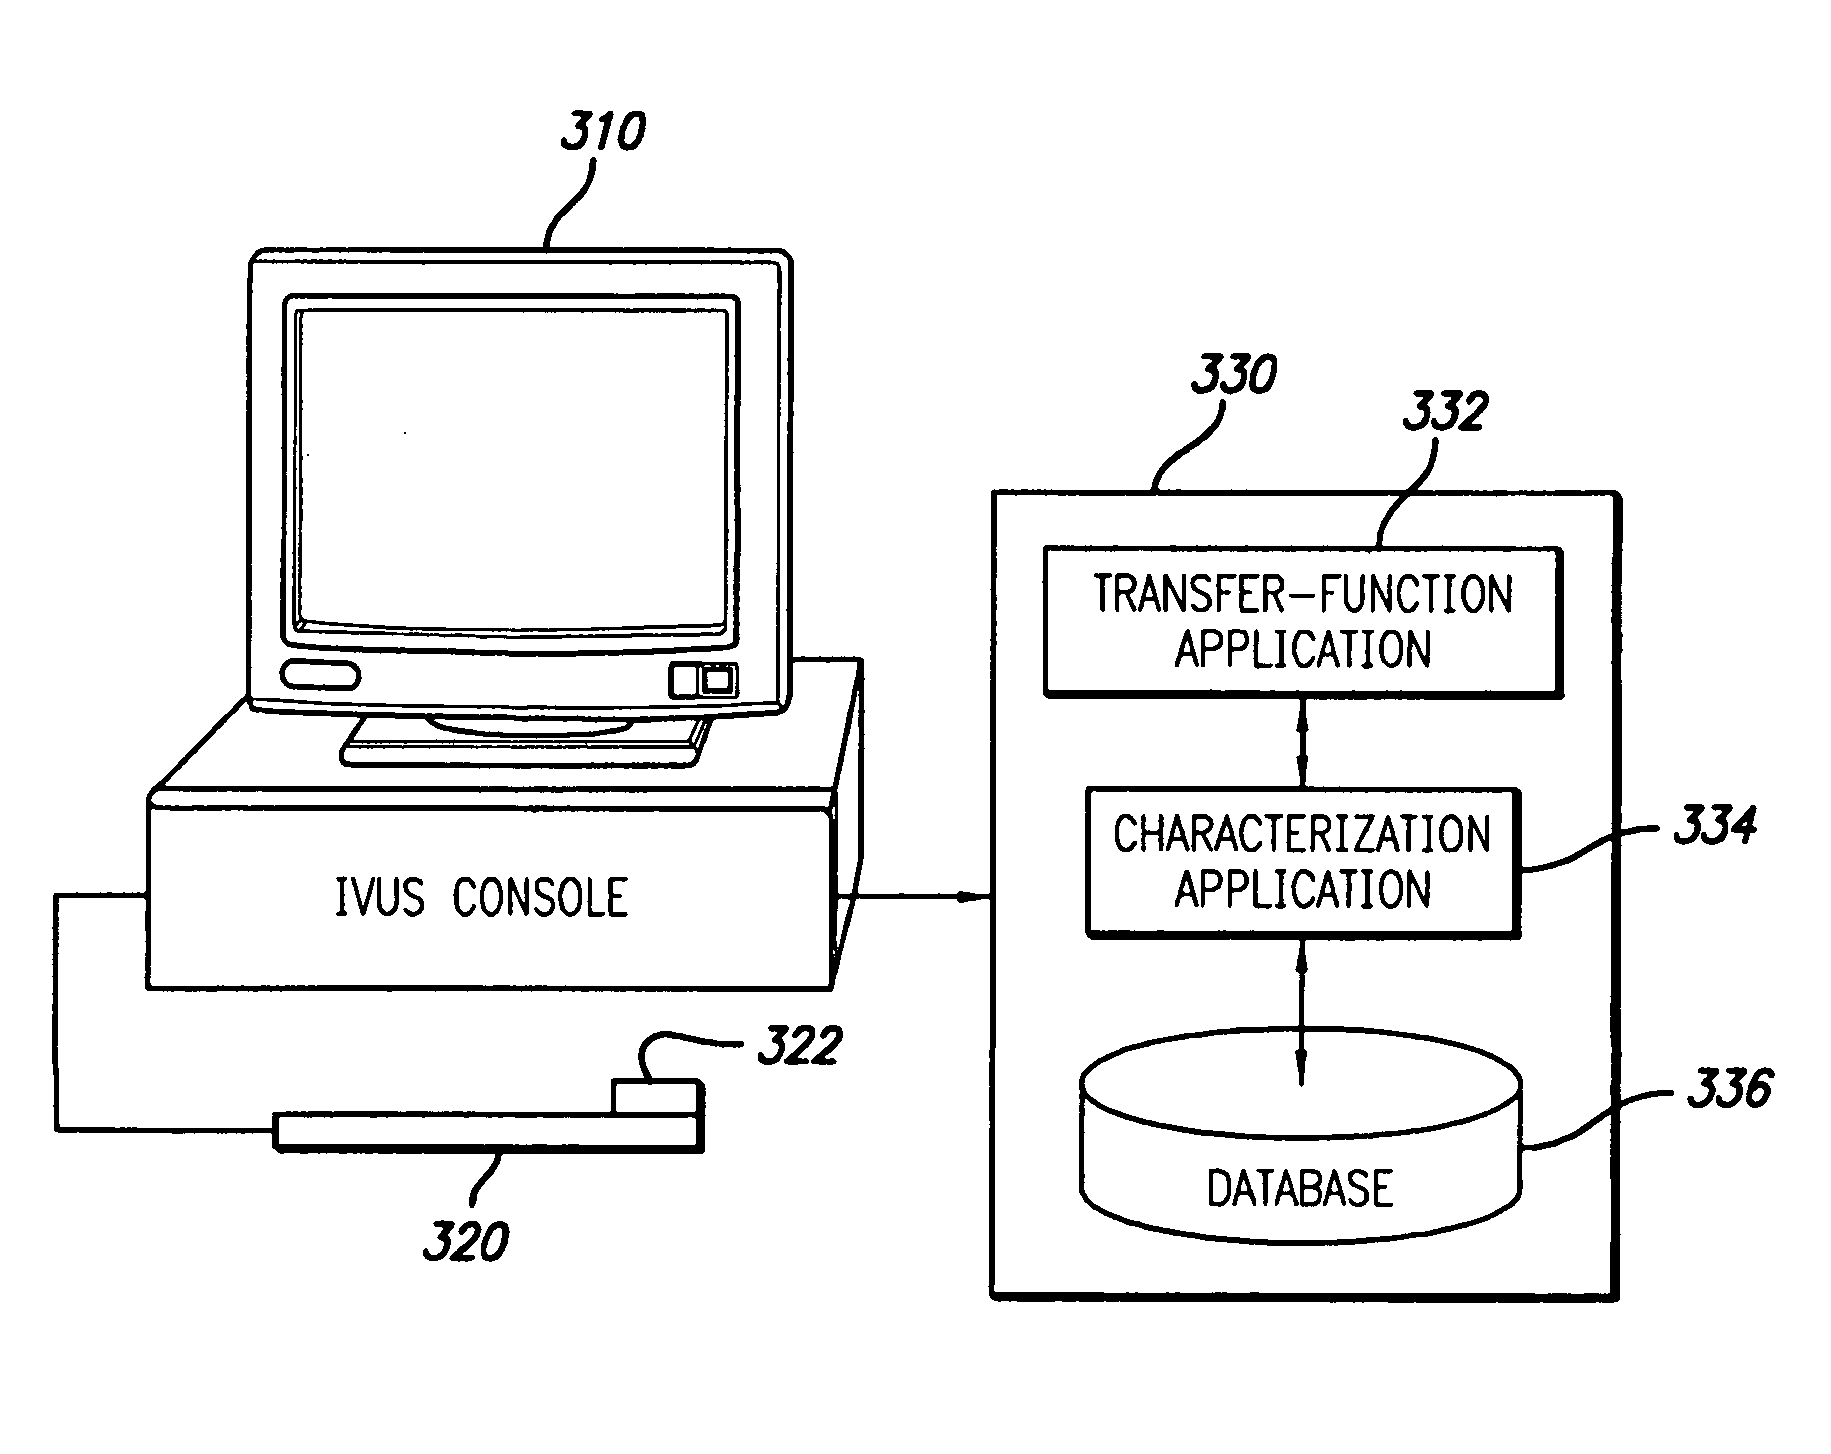 System and method for characterizing vascular tissue